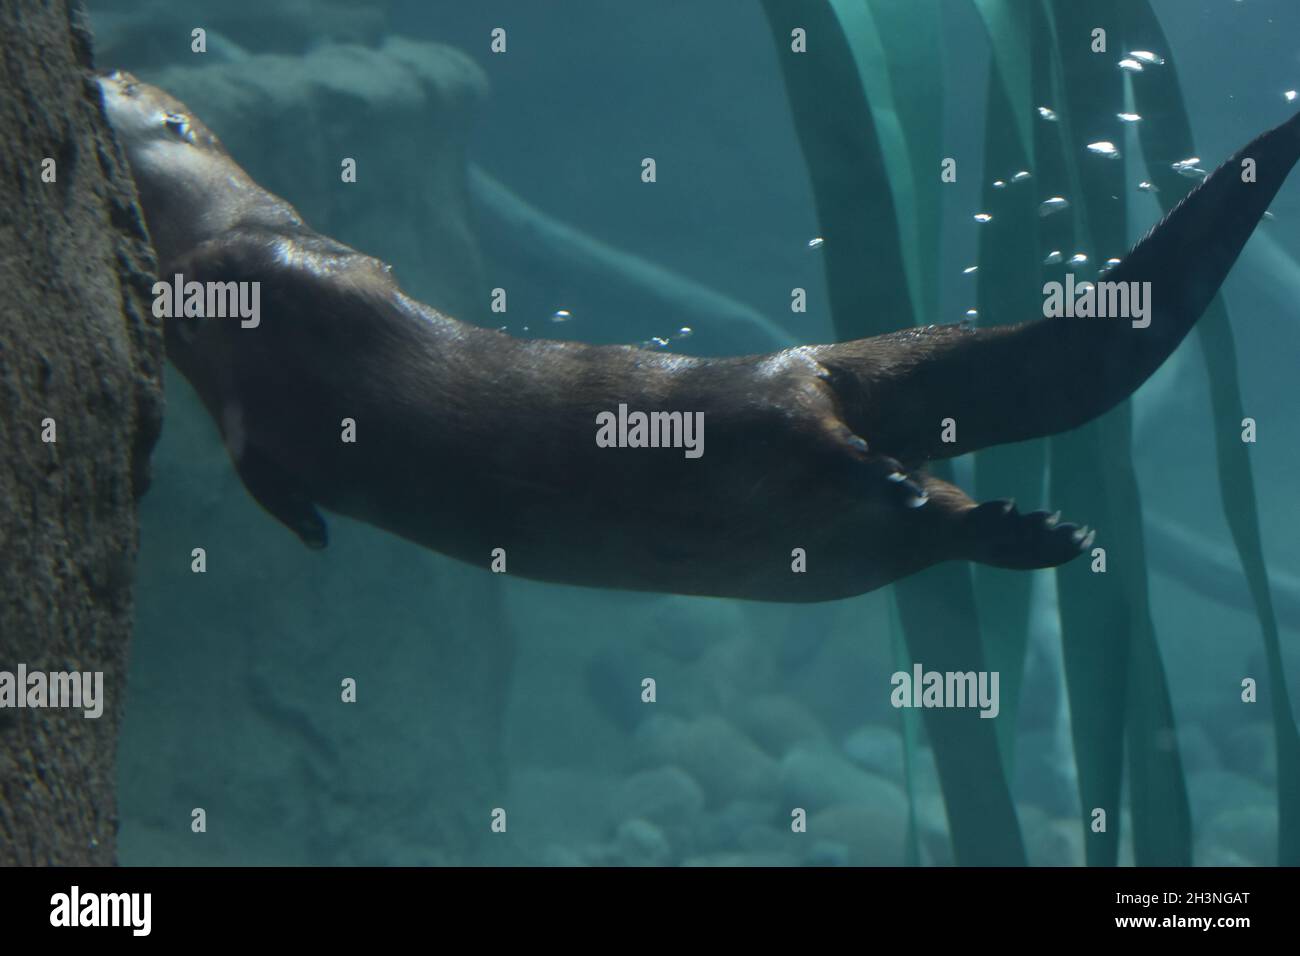 North American River Otter au zoo. Banque D'Images